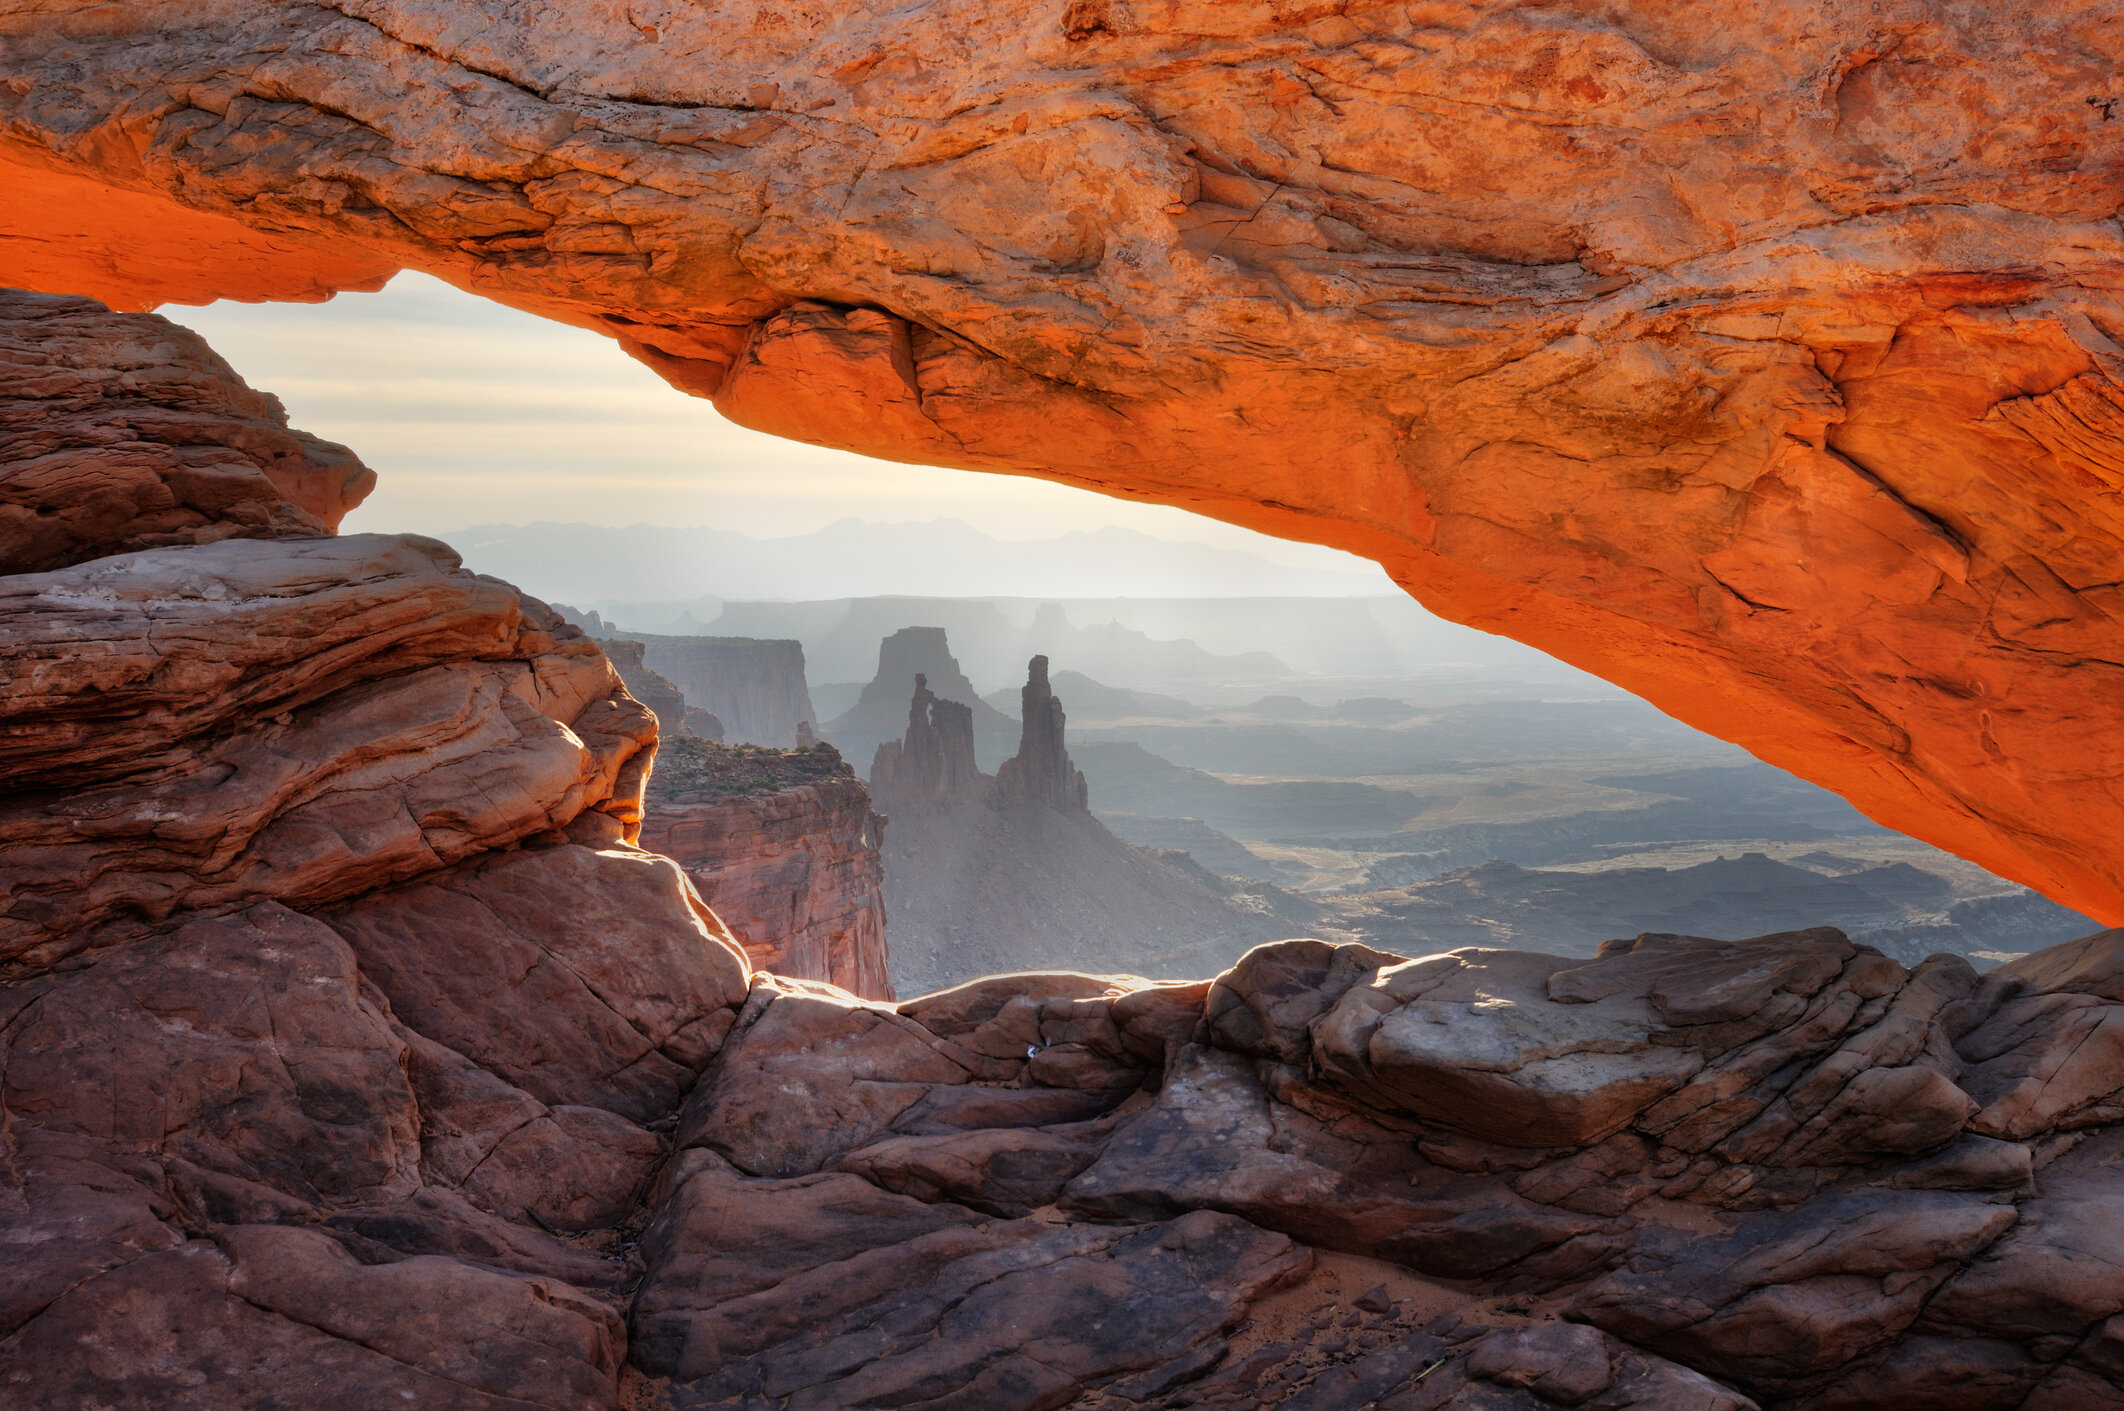 Mesa Arch is located in Canyonlands National Park in northern San Juan County, Utah on Núu-agha-tʉvʉ-pʉ̱ (Ute) land. Photo by Rezus/iStock / Getty Images